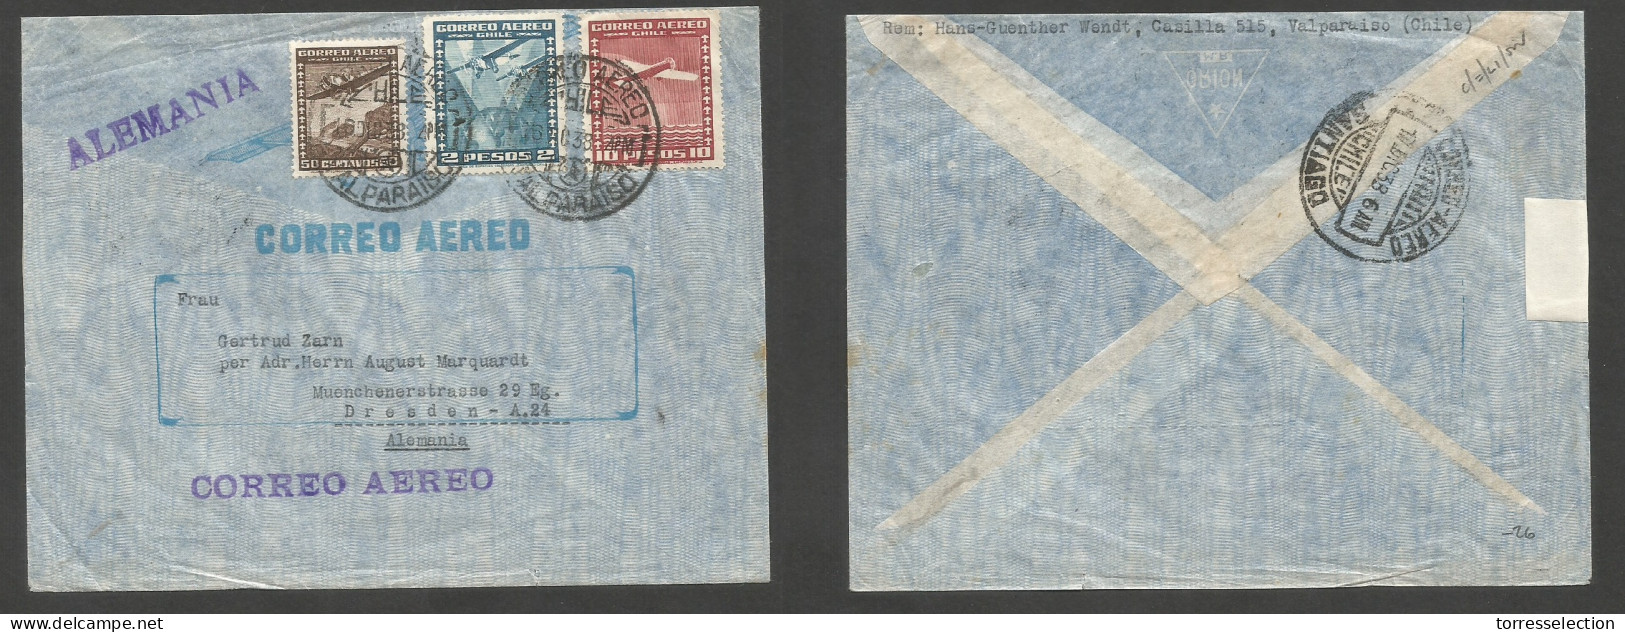 Chile - XX. 1938 (26 Dic) Valp - Germany, Dresden. Air Multifkd Env At 12,50 Pesos Rate. Fine. XSALE. - Chile